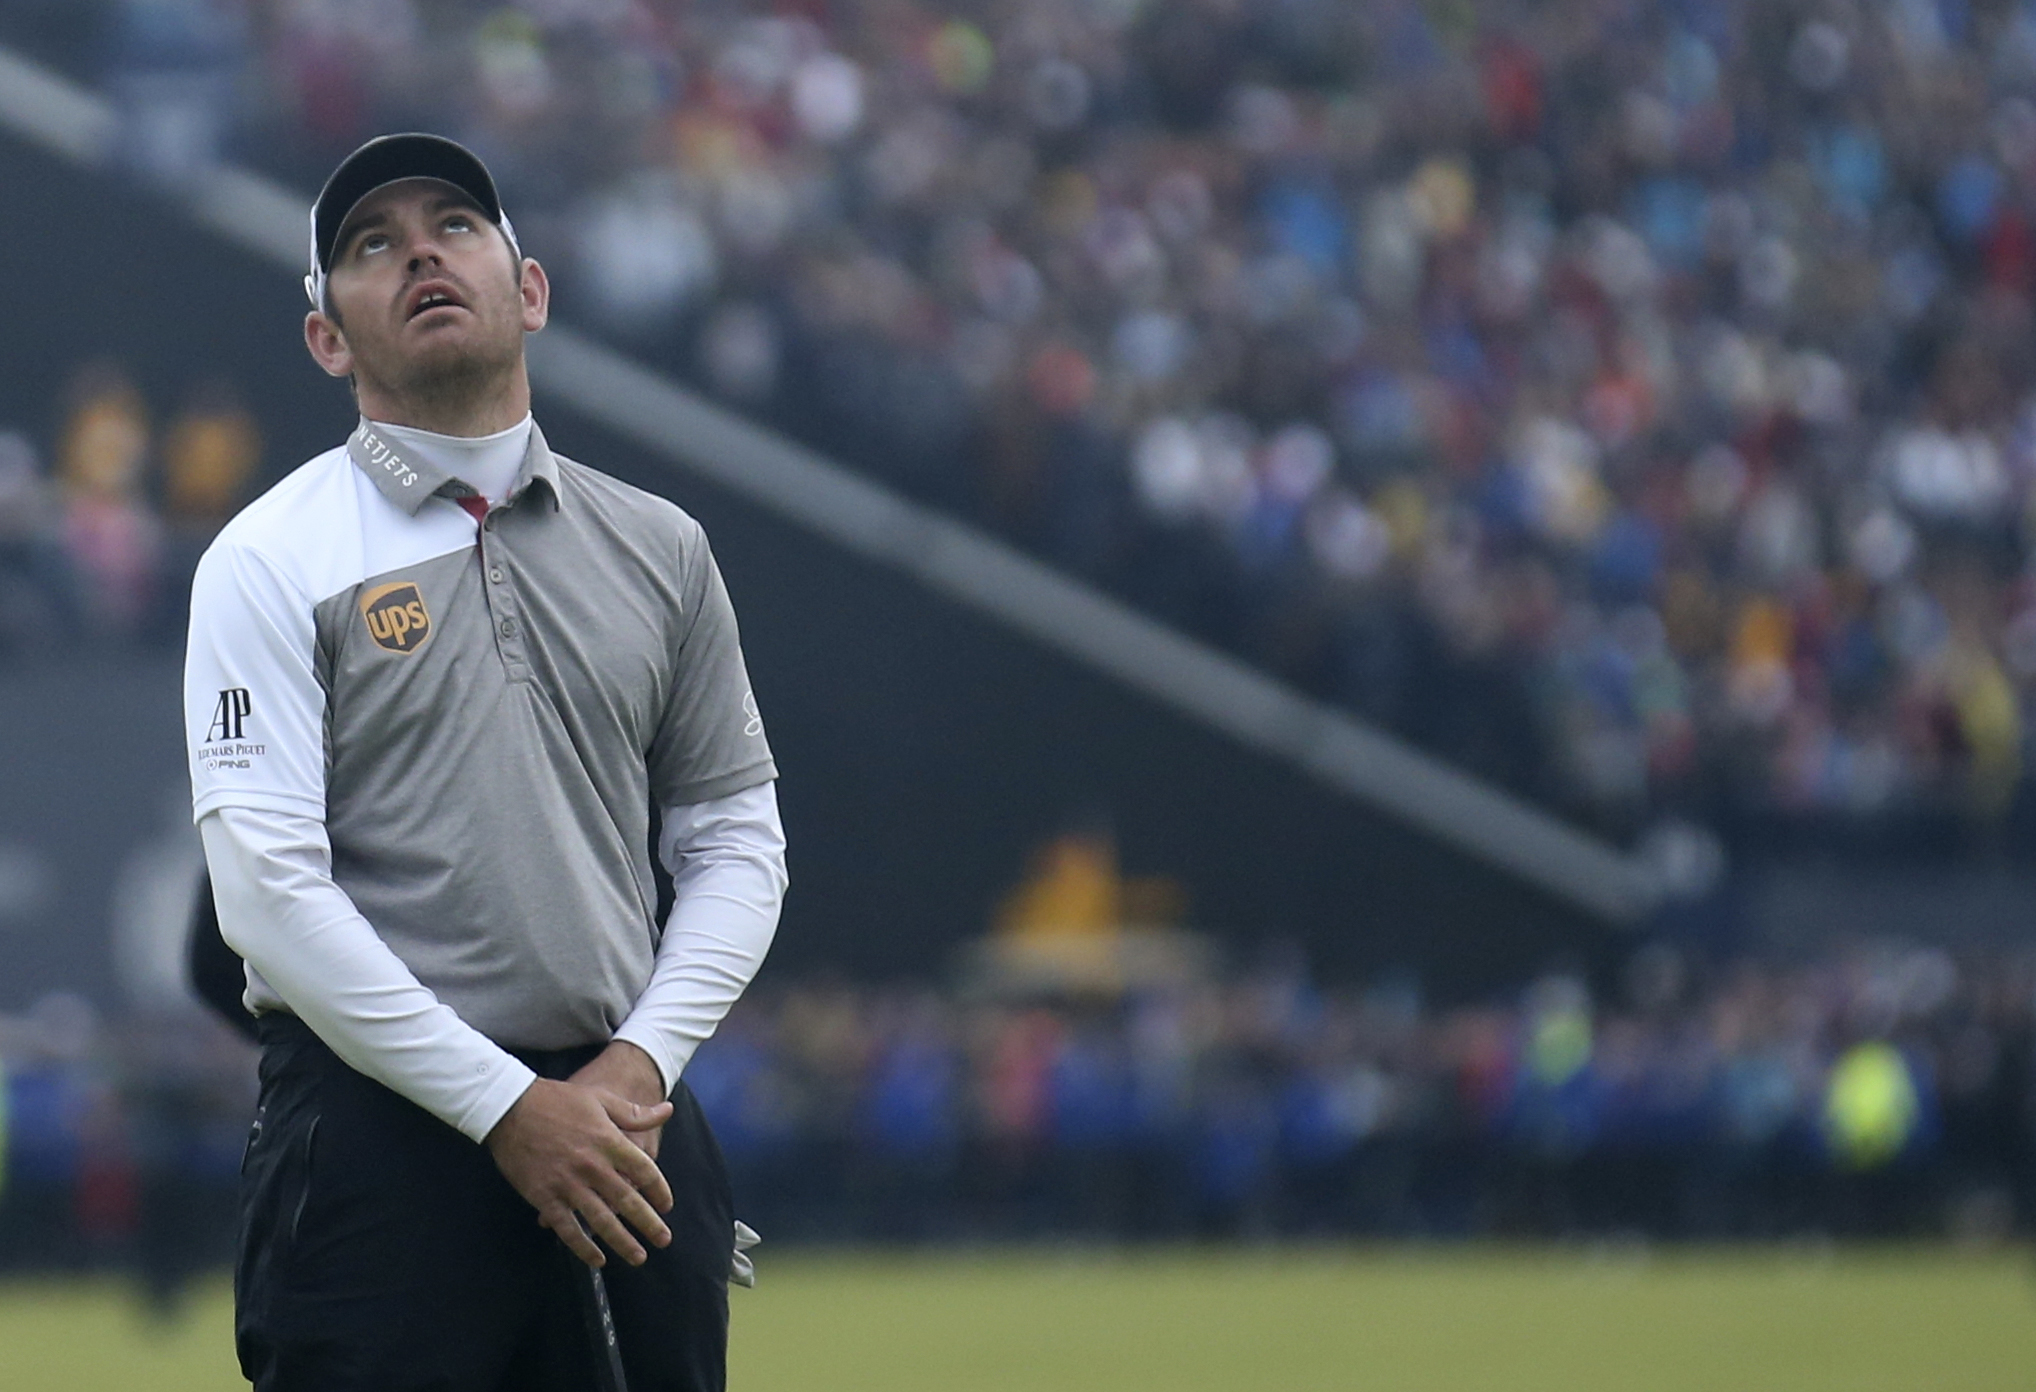 Louis Oosthuizen rolls his eyes after missing a putt on the 17th during the play-off. Photo: AP
